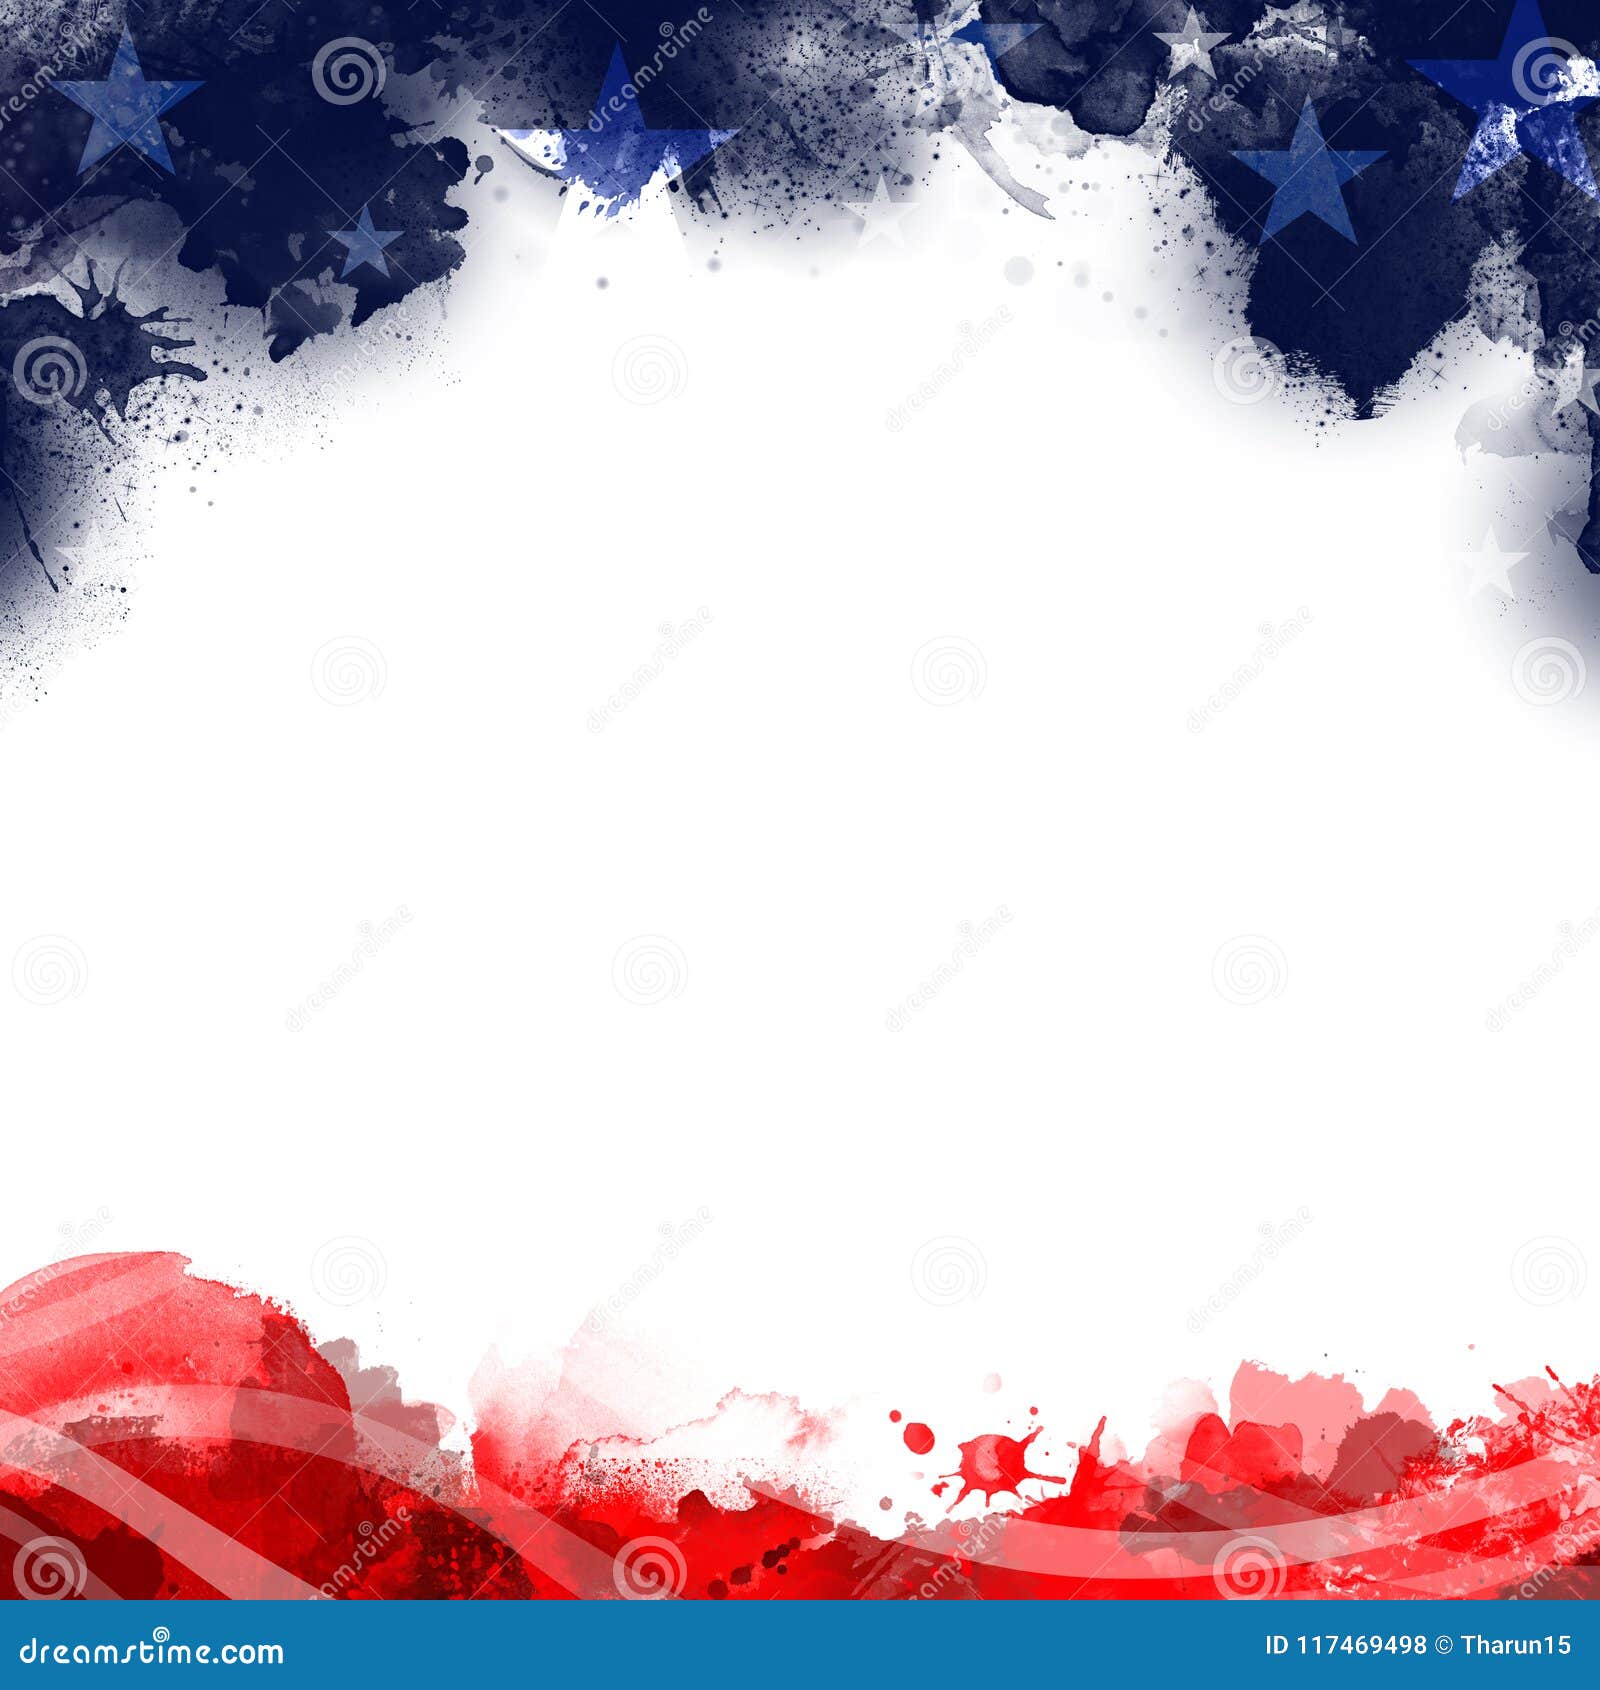 a header footer  of united states patriotic background in flag colors